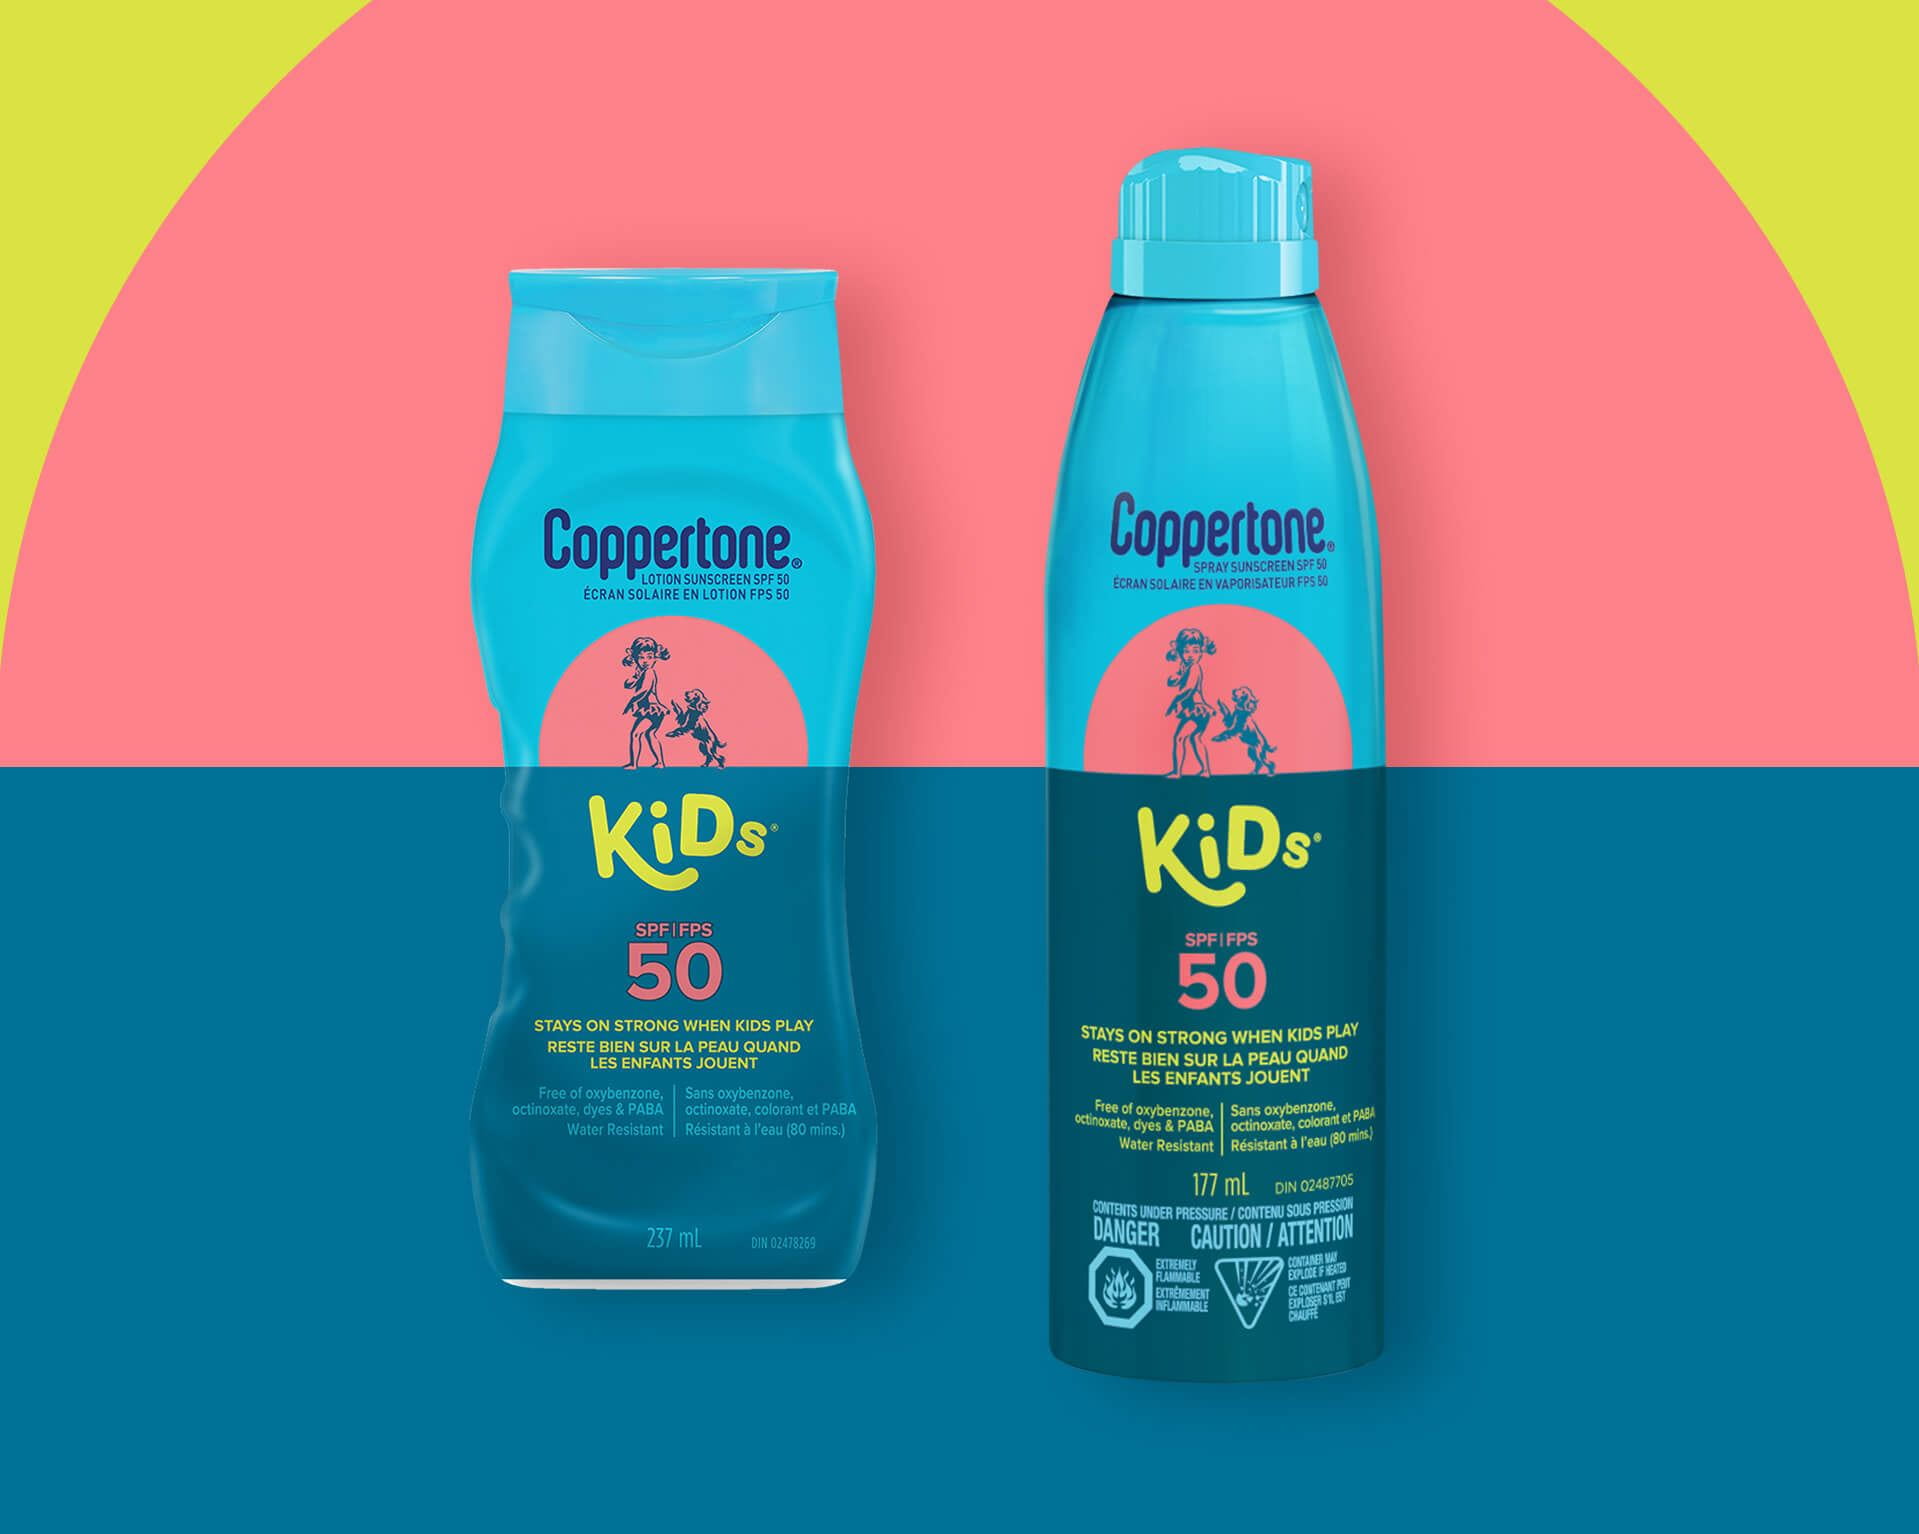 A view of two Coppertone Kids SPF products beside each other against a pink, yellow and blue colour block background.